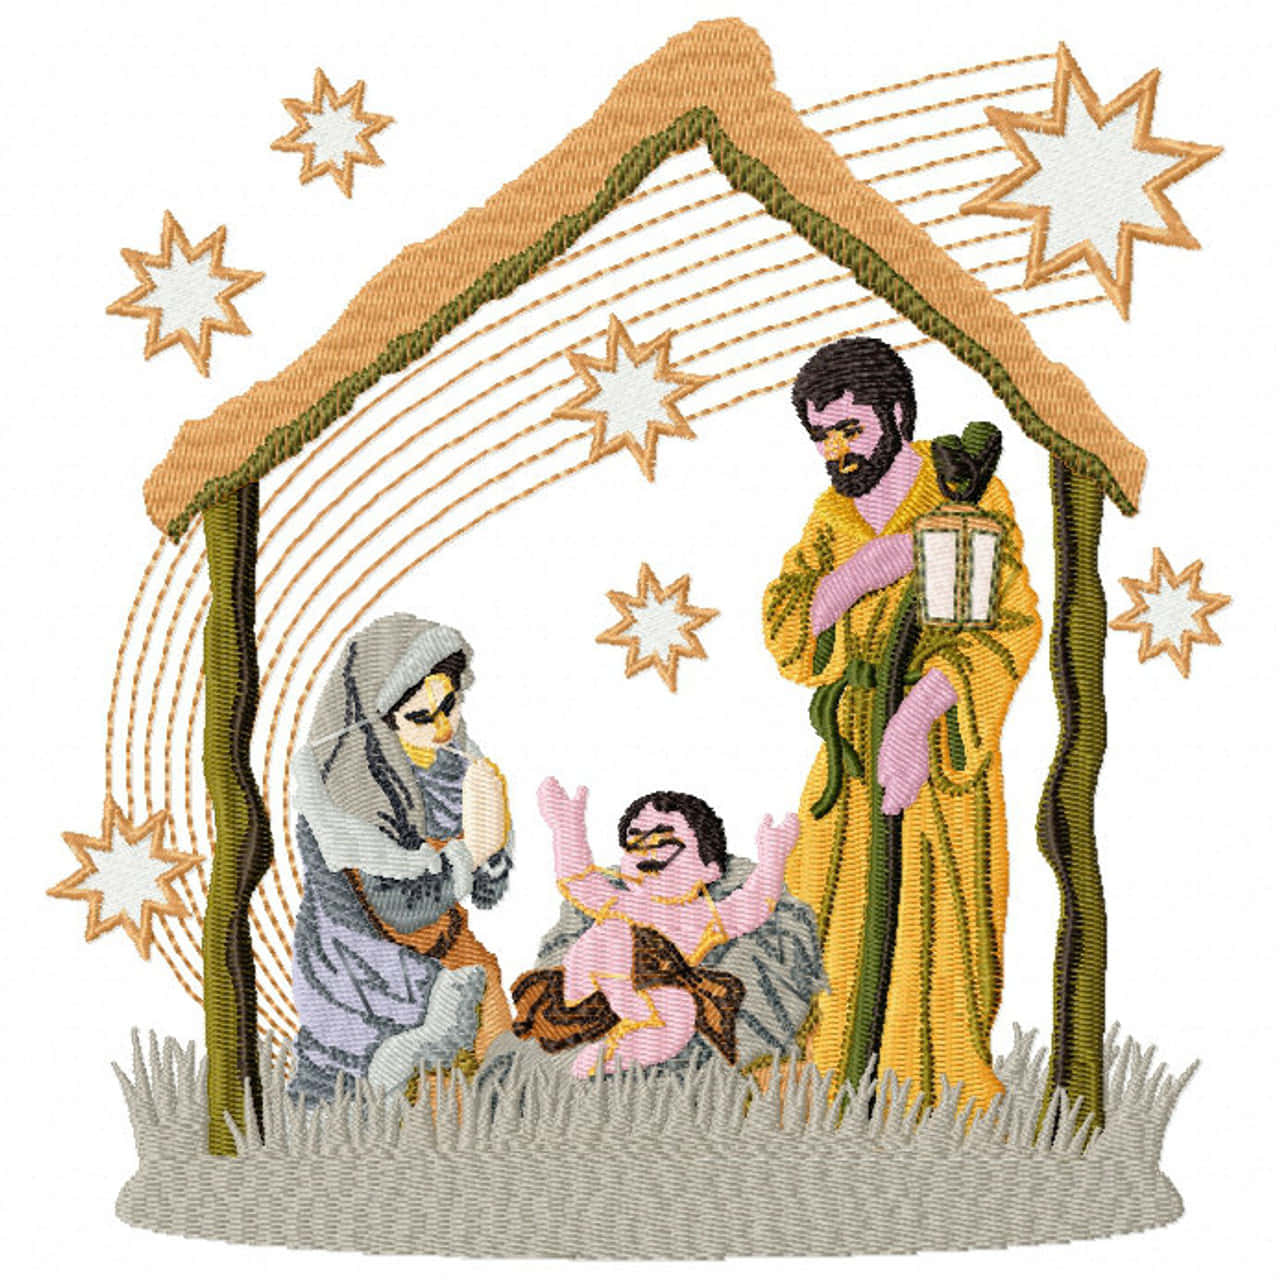 Celebrate the Miracle of Christmas